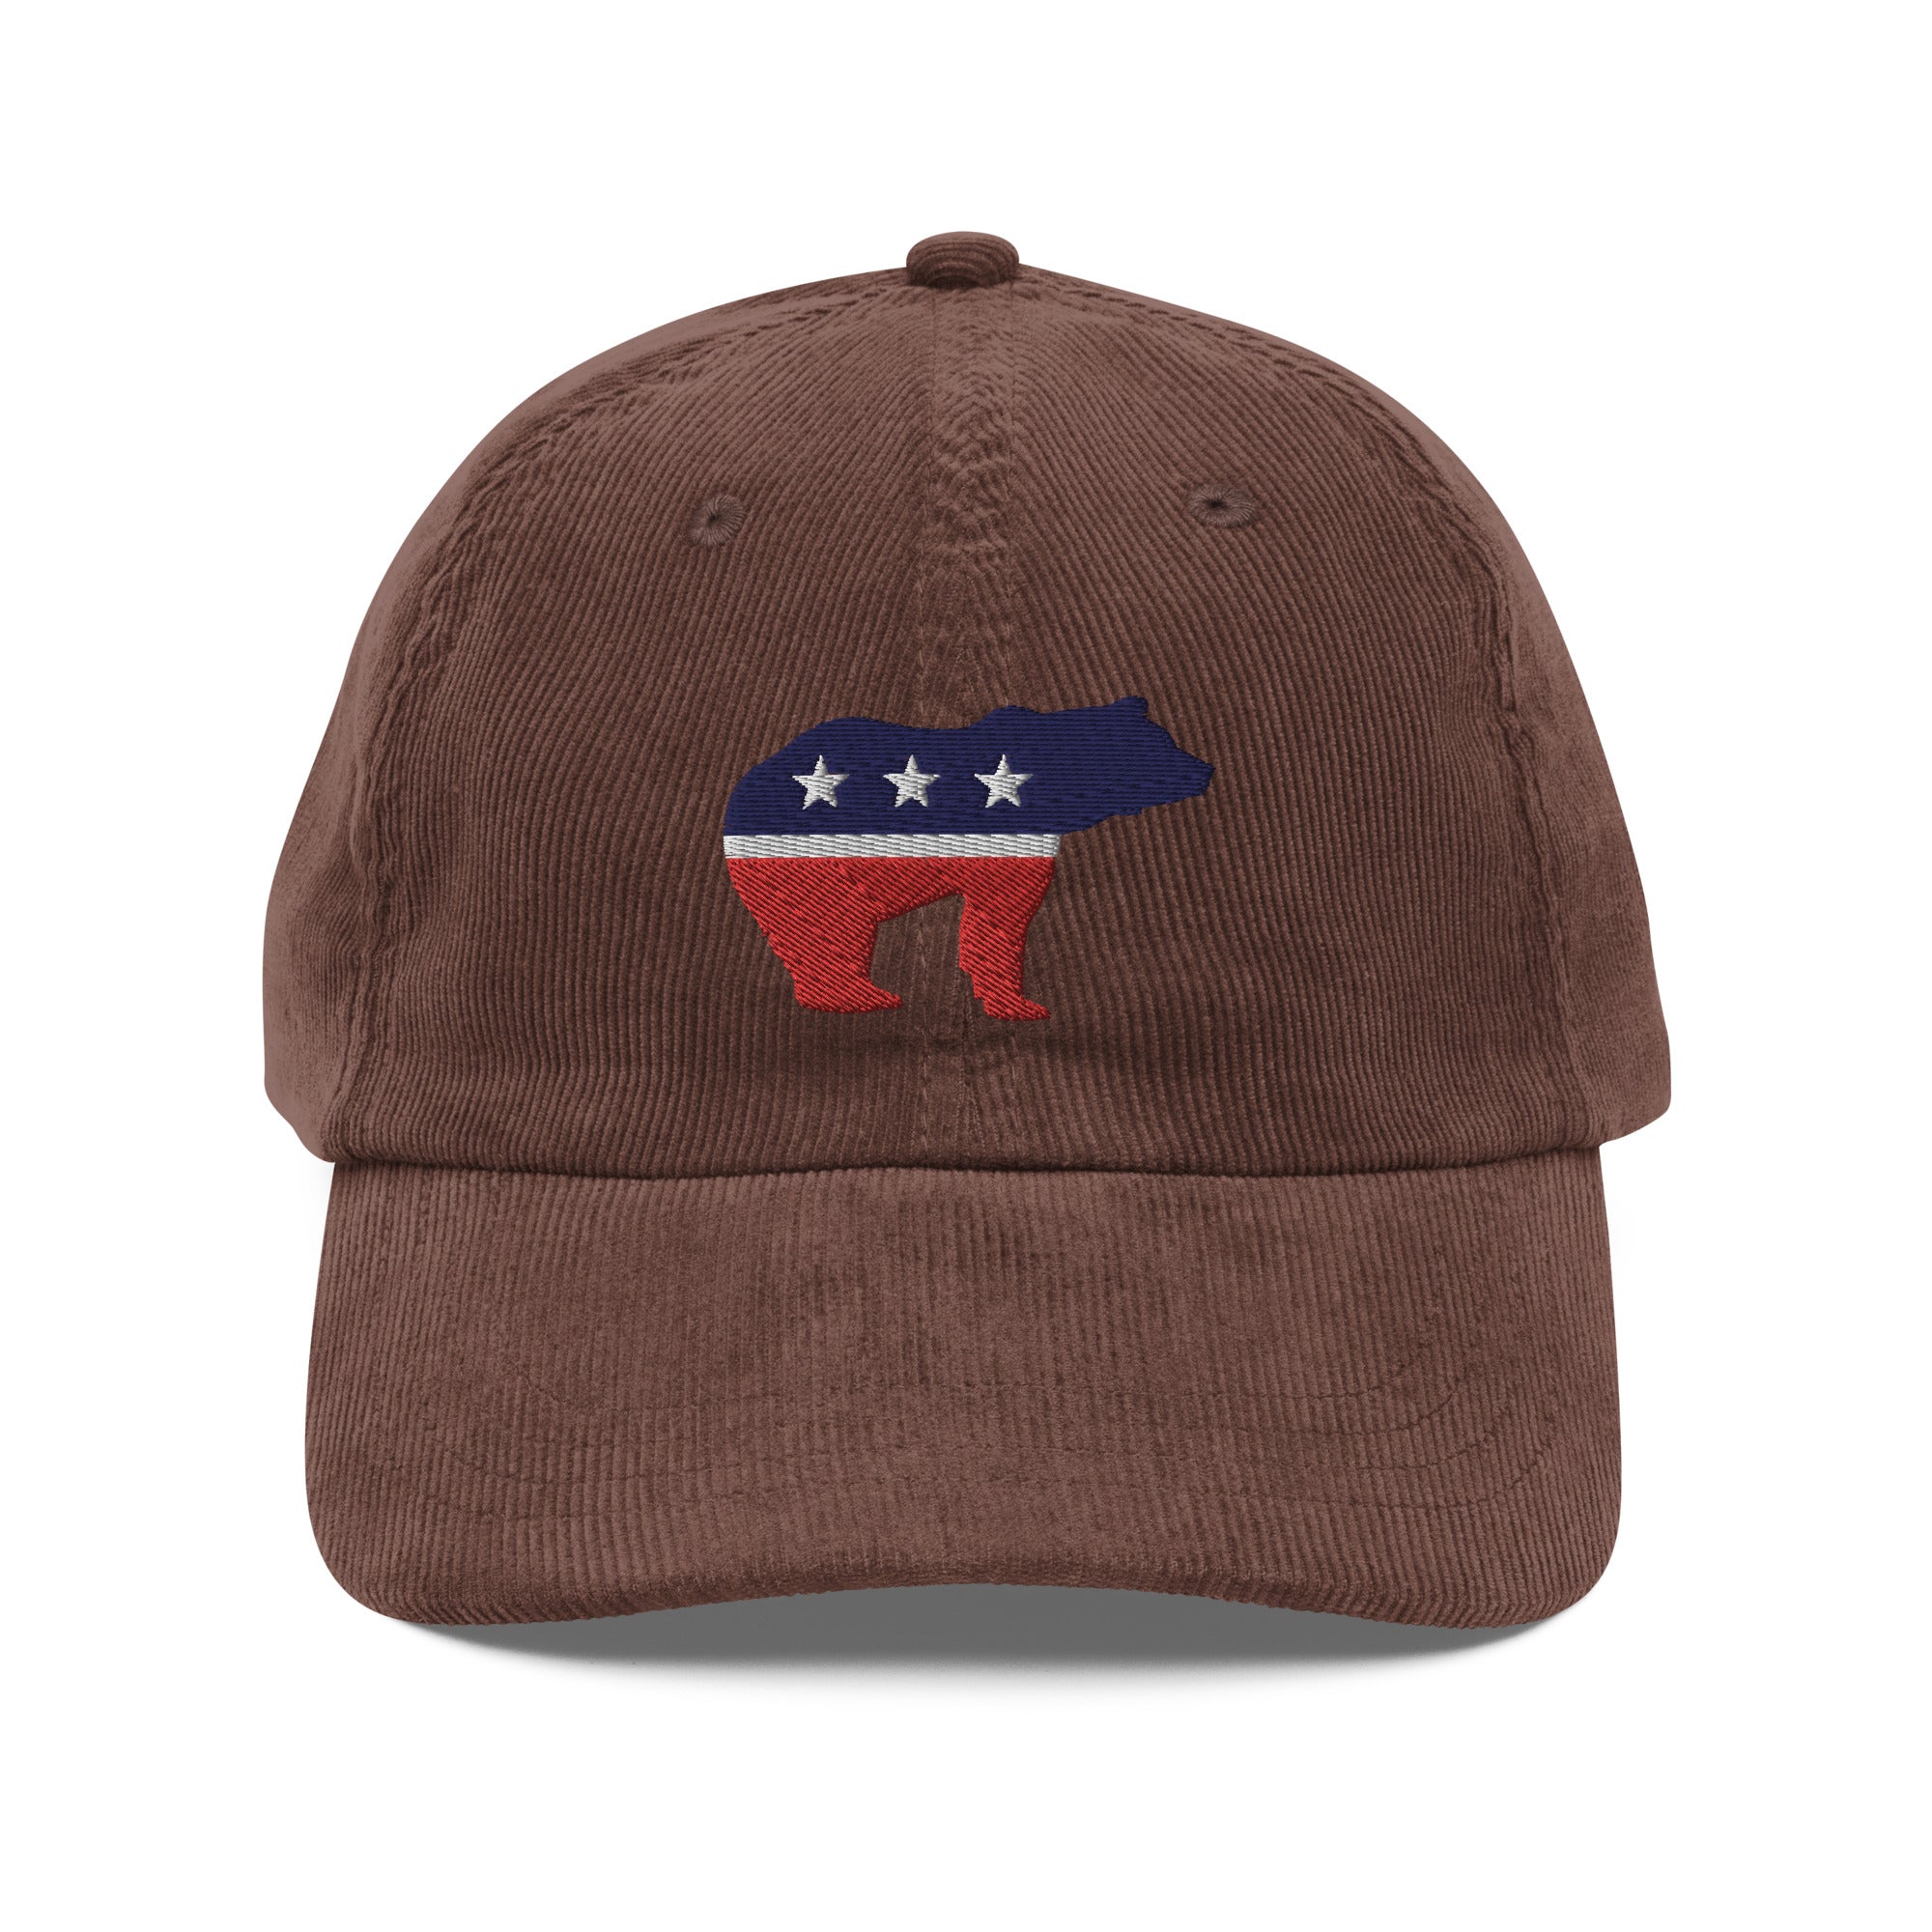 Independent Grizzly Bear Vintage Corduroy Cap